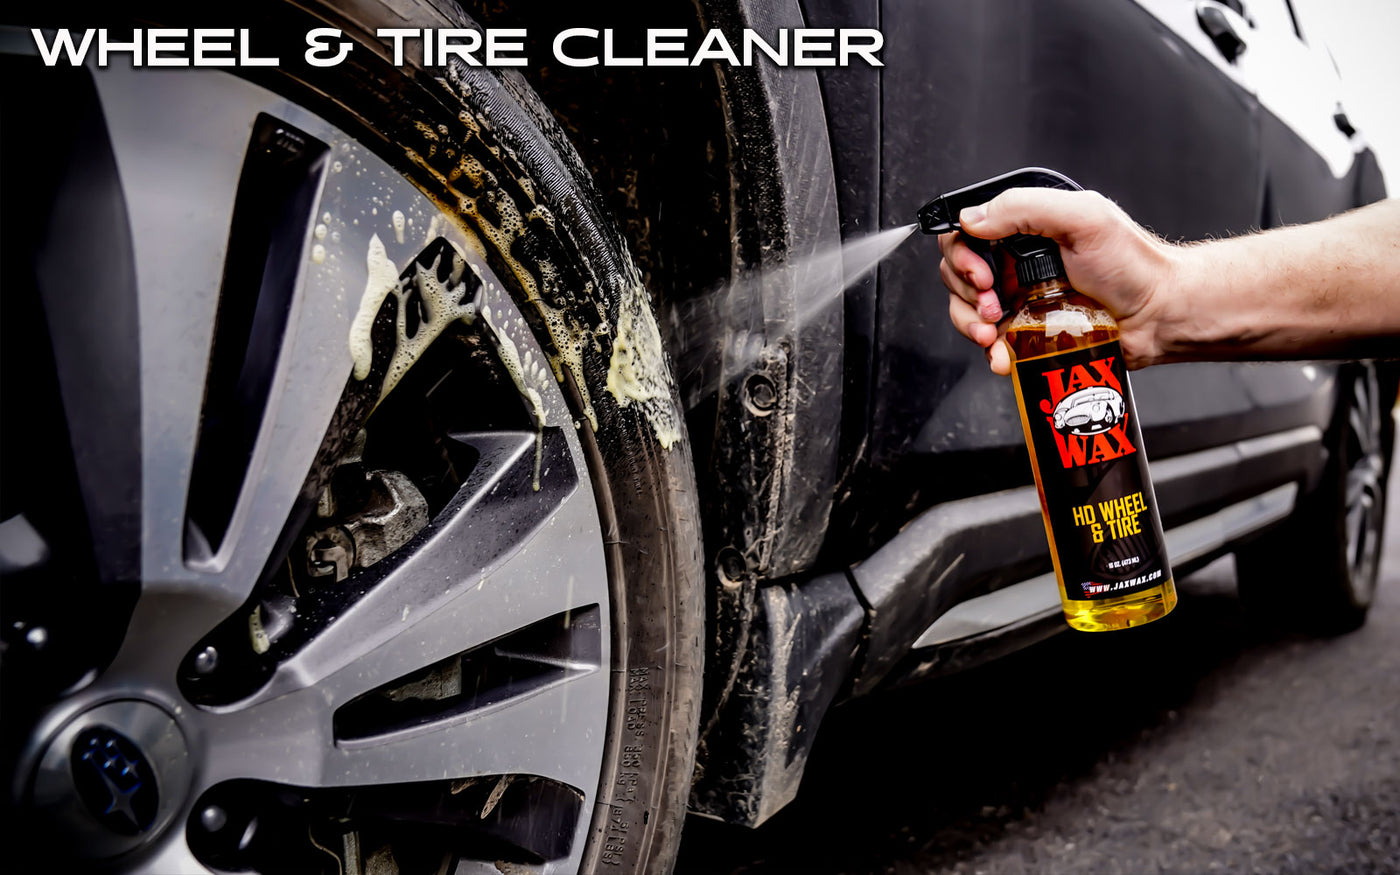 Wheel & Tire Cleaner Concentrate – MA5X®